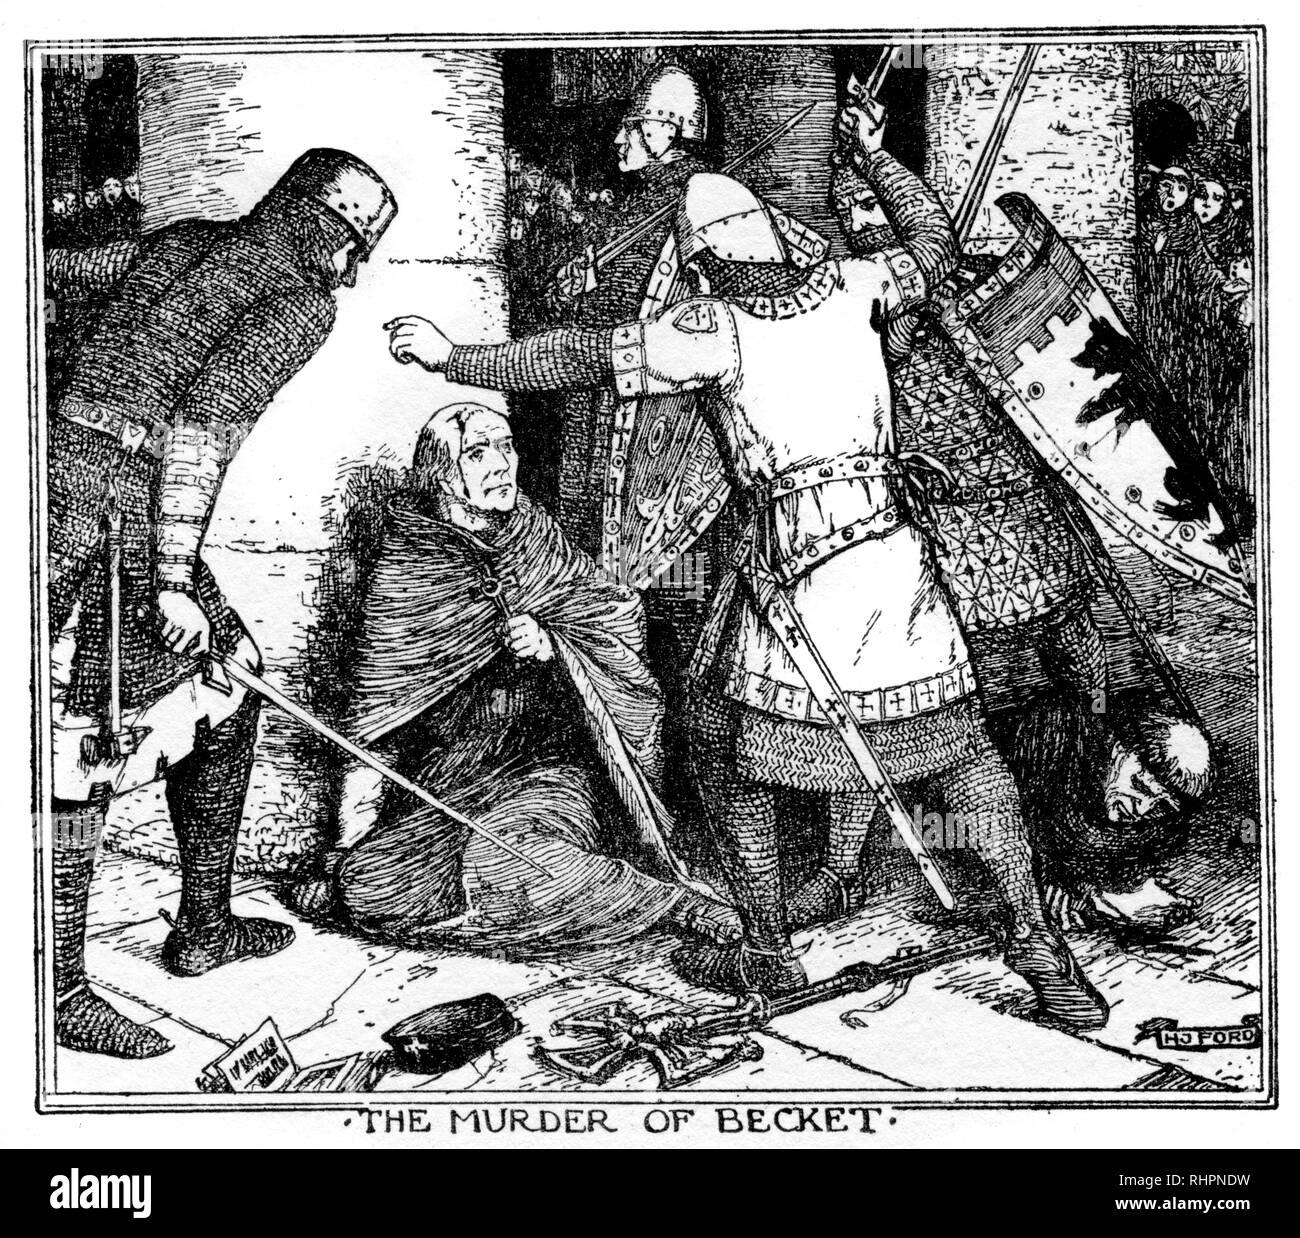 The Murder of Becket. By Henry Justice Ford (1860-1941). Thomas Becket, also known as Saint Thomas of Canterbury, Thomas of London and Thomas à Becket (c1119–1170), was Archbishop of Canterbury from 1162 until his murder in 1170. He is venerated as a saint and martyr by both the Catholic Church and the Anglican Communion. He engaged in conflict with Henry II, King of England, over the rights of the Church and was murdered by followers of the king in Canterbury Cathedral. Stock Photo